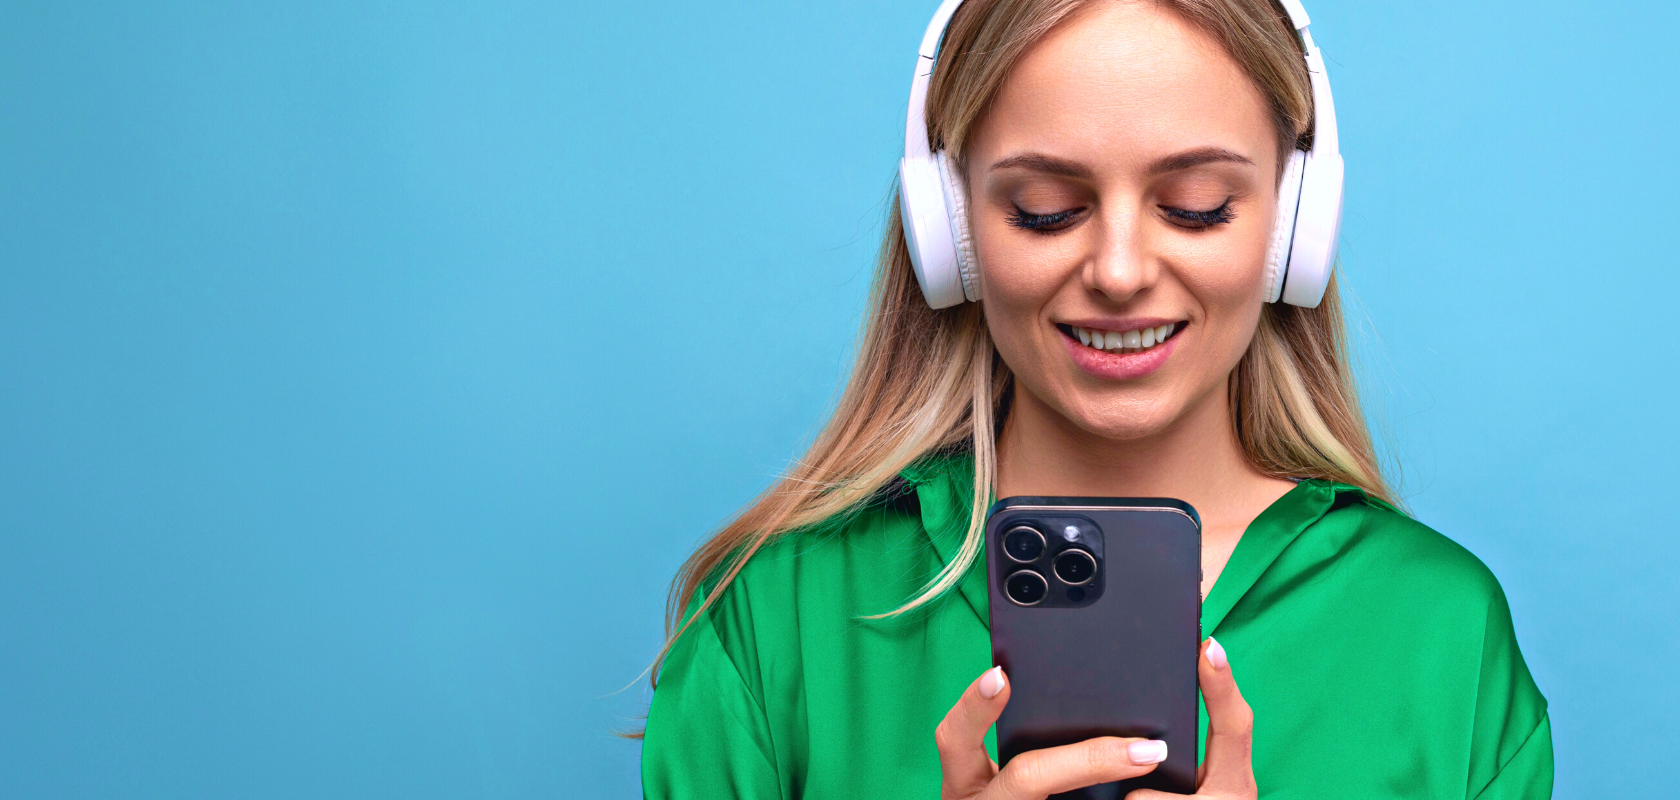 Image is of a woman listening to a podcast through her mobile phone whilst wearing headphones.